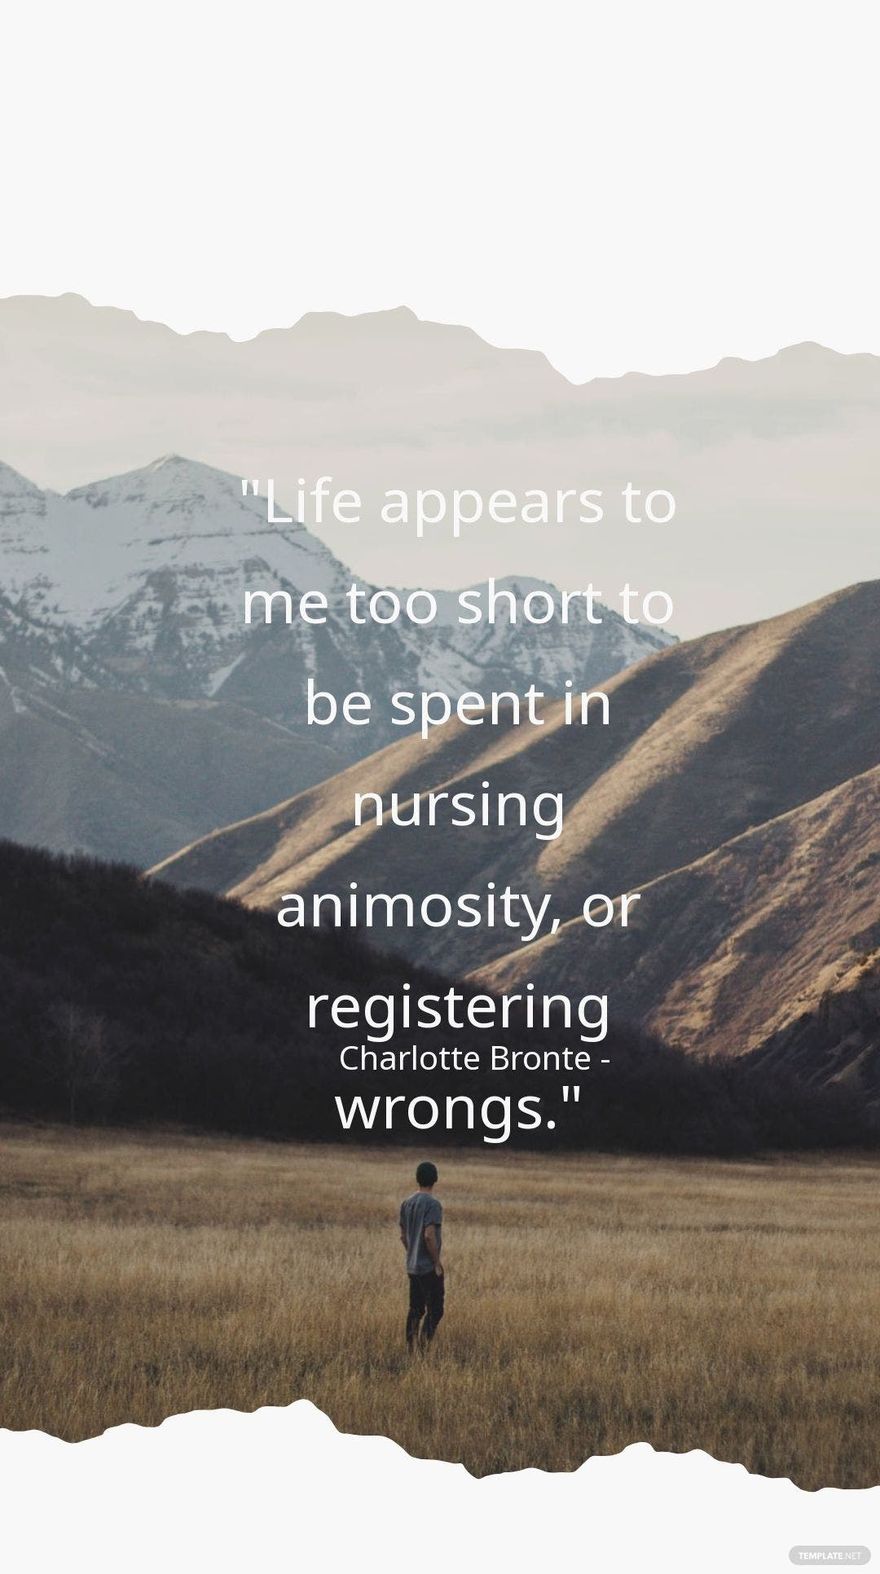 Charlotte Bronte - Life appears to me too short to be spent in nursing animosity, or registering wrongs.